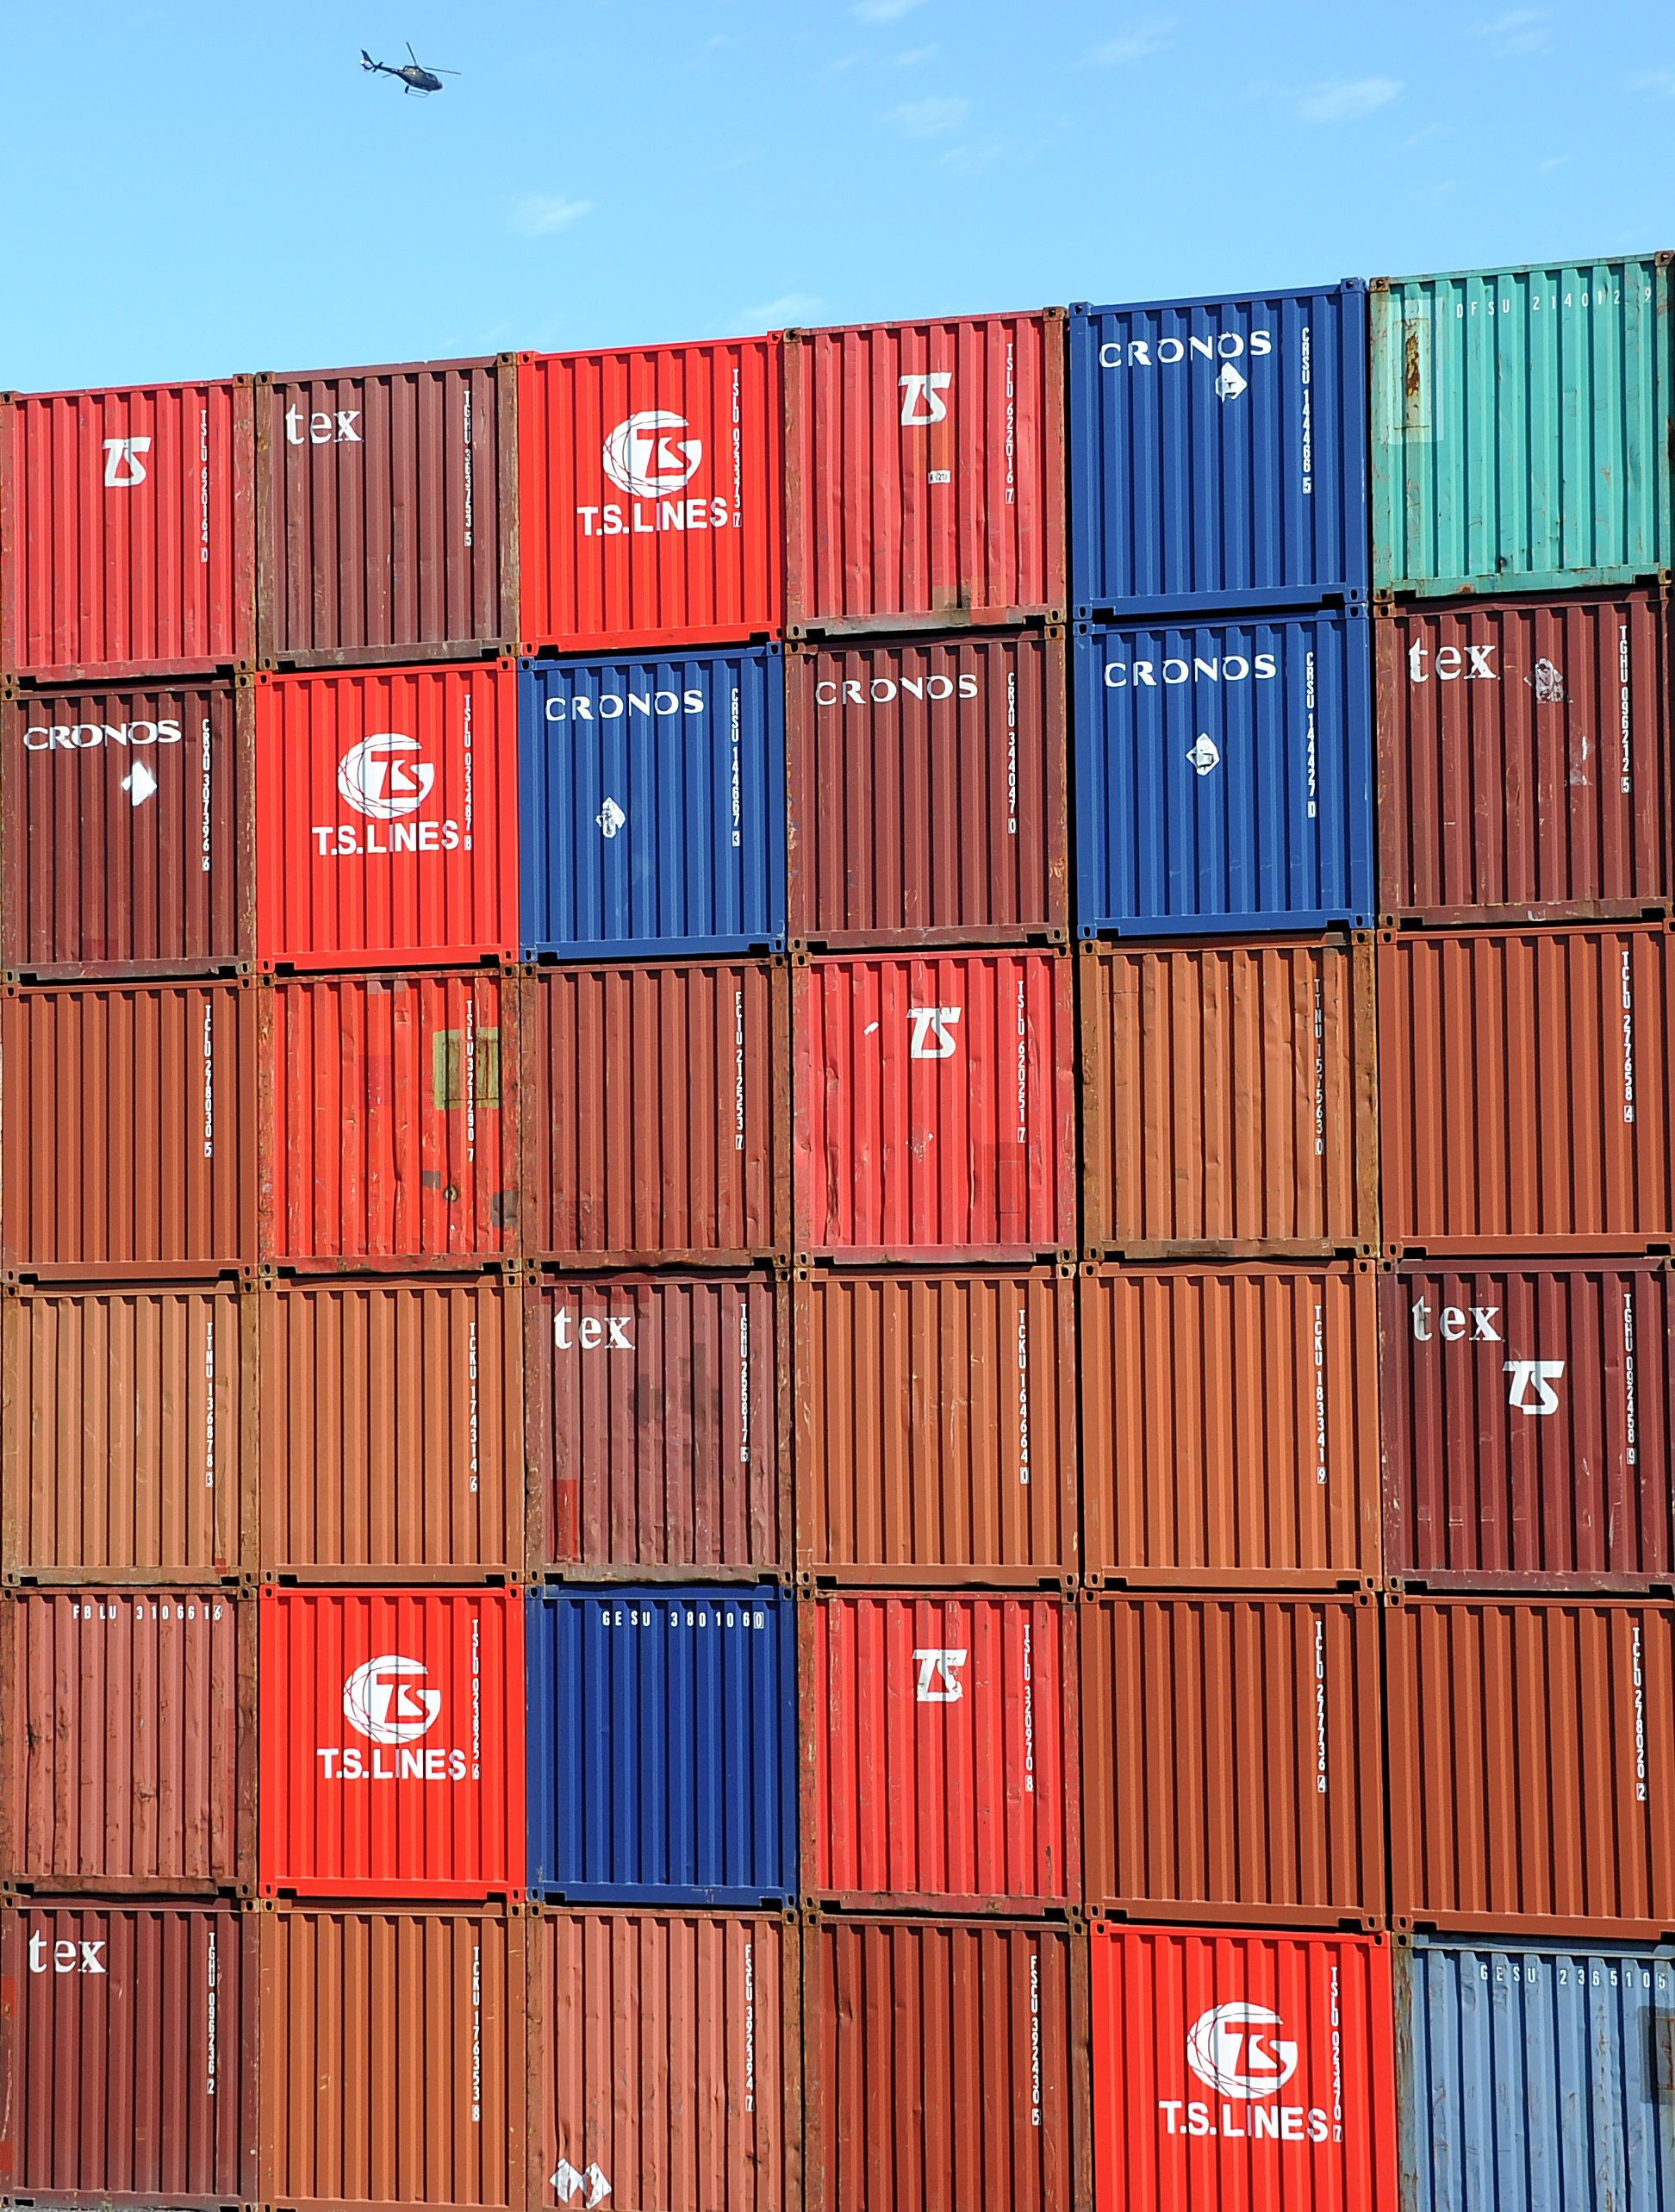 Shipping containers from around the world are stacked at Port Botany in Sydney on December 3, 2010. A report released on April 6, 2011 said the World Trade Organisation (WTO) is calling on the Australian government to deliver large scale changes to the structure of the economy or face far-reaching consequences. AFP PHOTO / Torsten BLACKWOOD